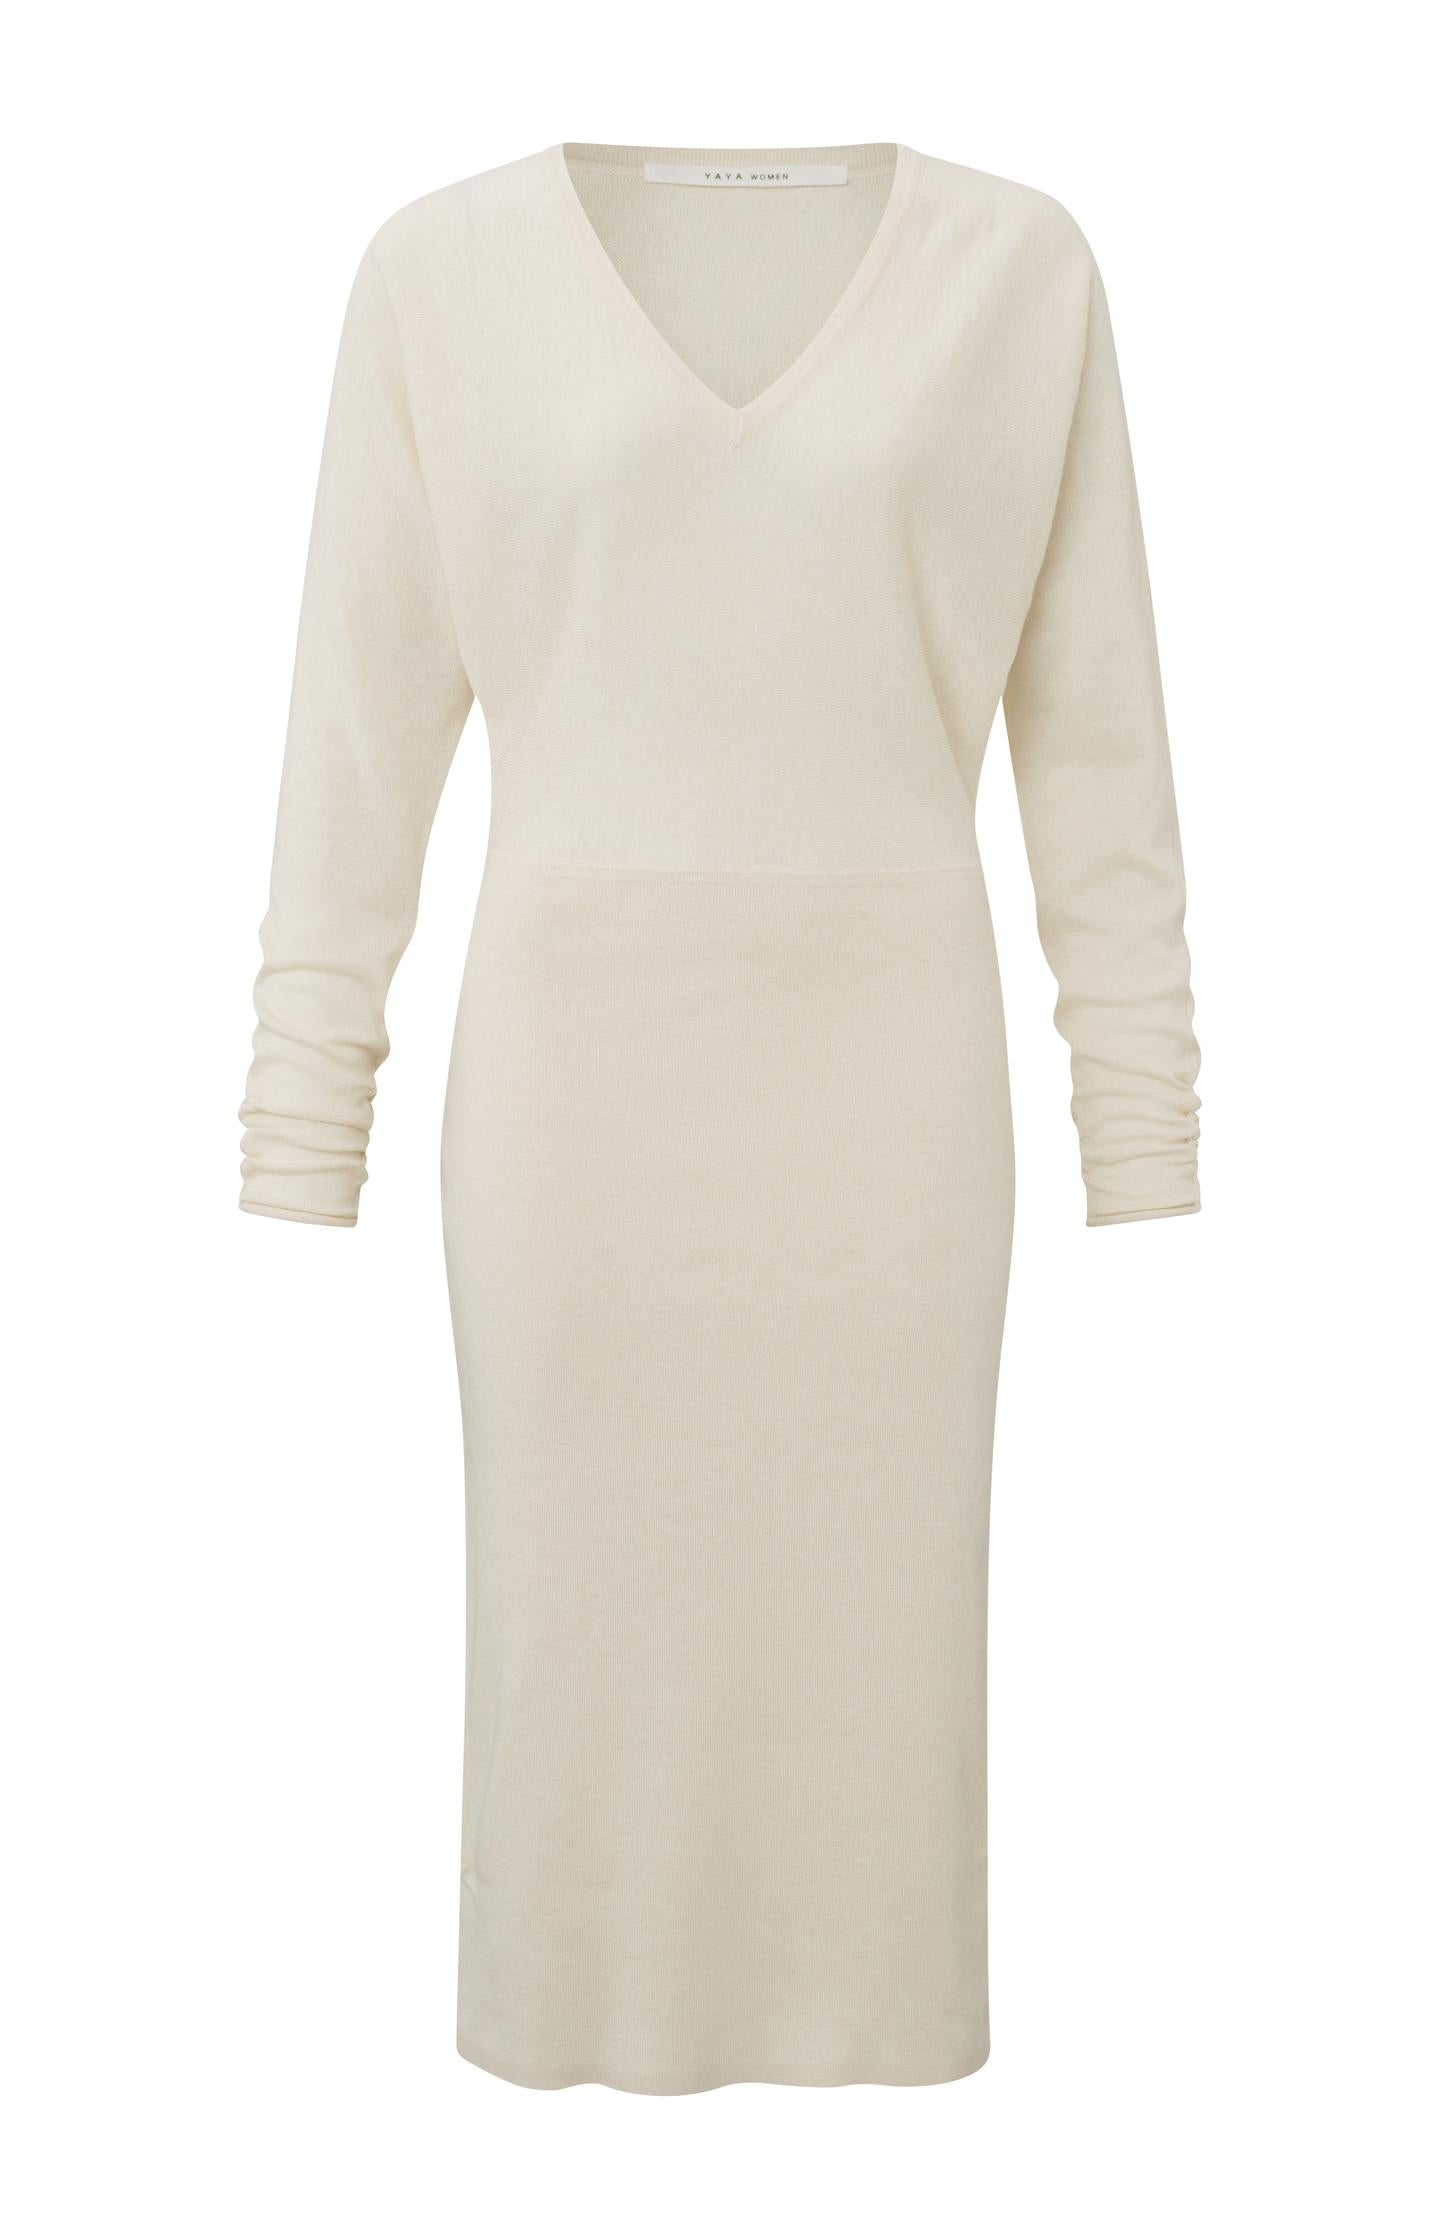 Midi dress with V-neck and long sleeves in a close fit - Type: product